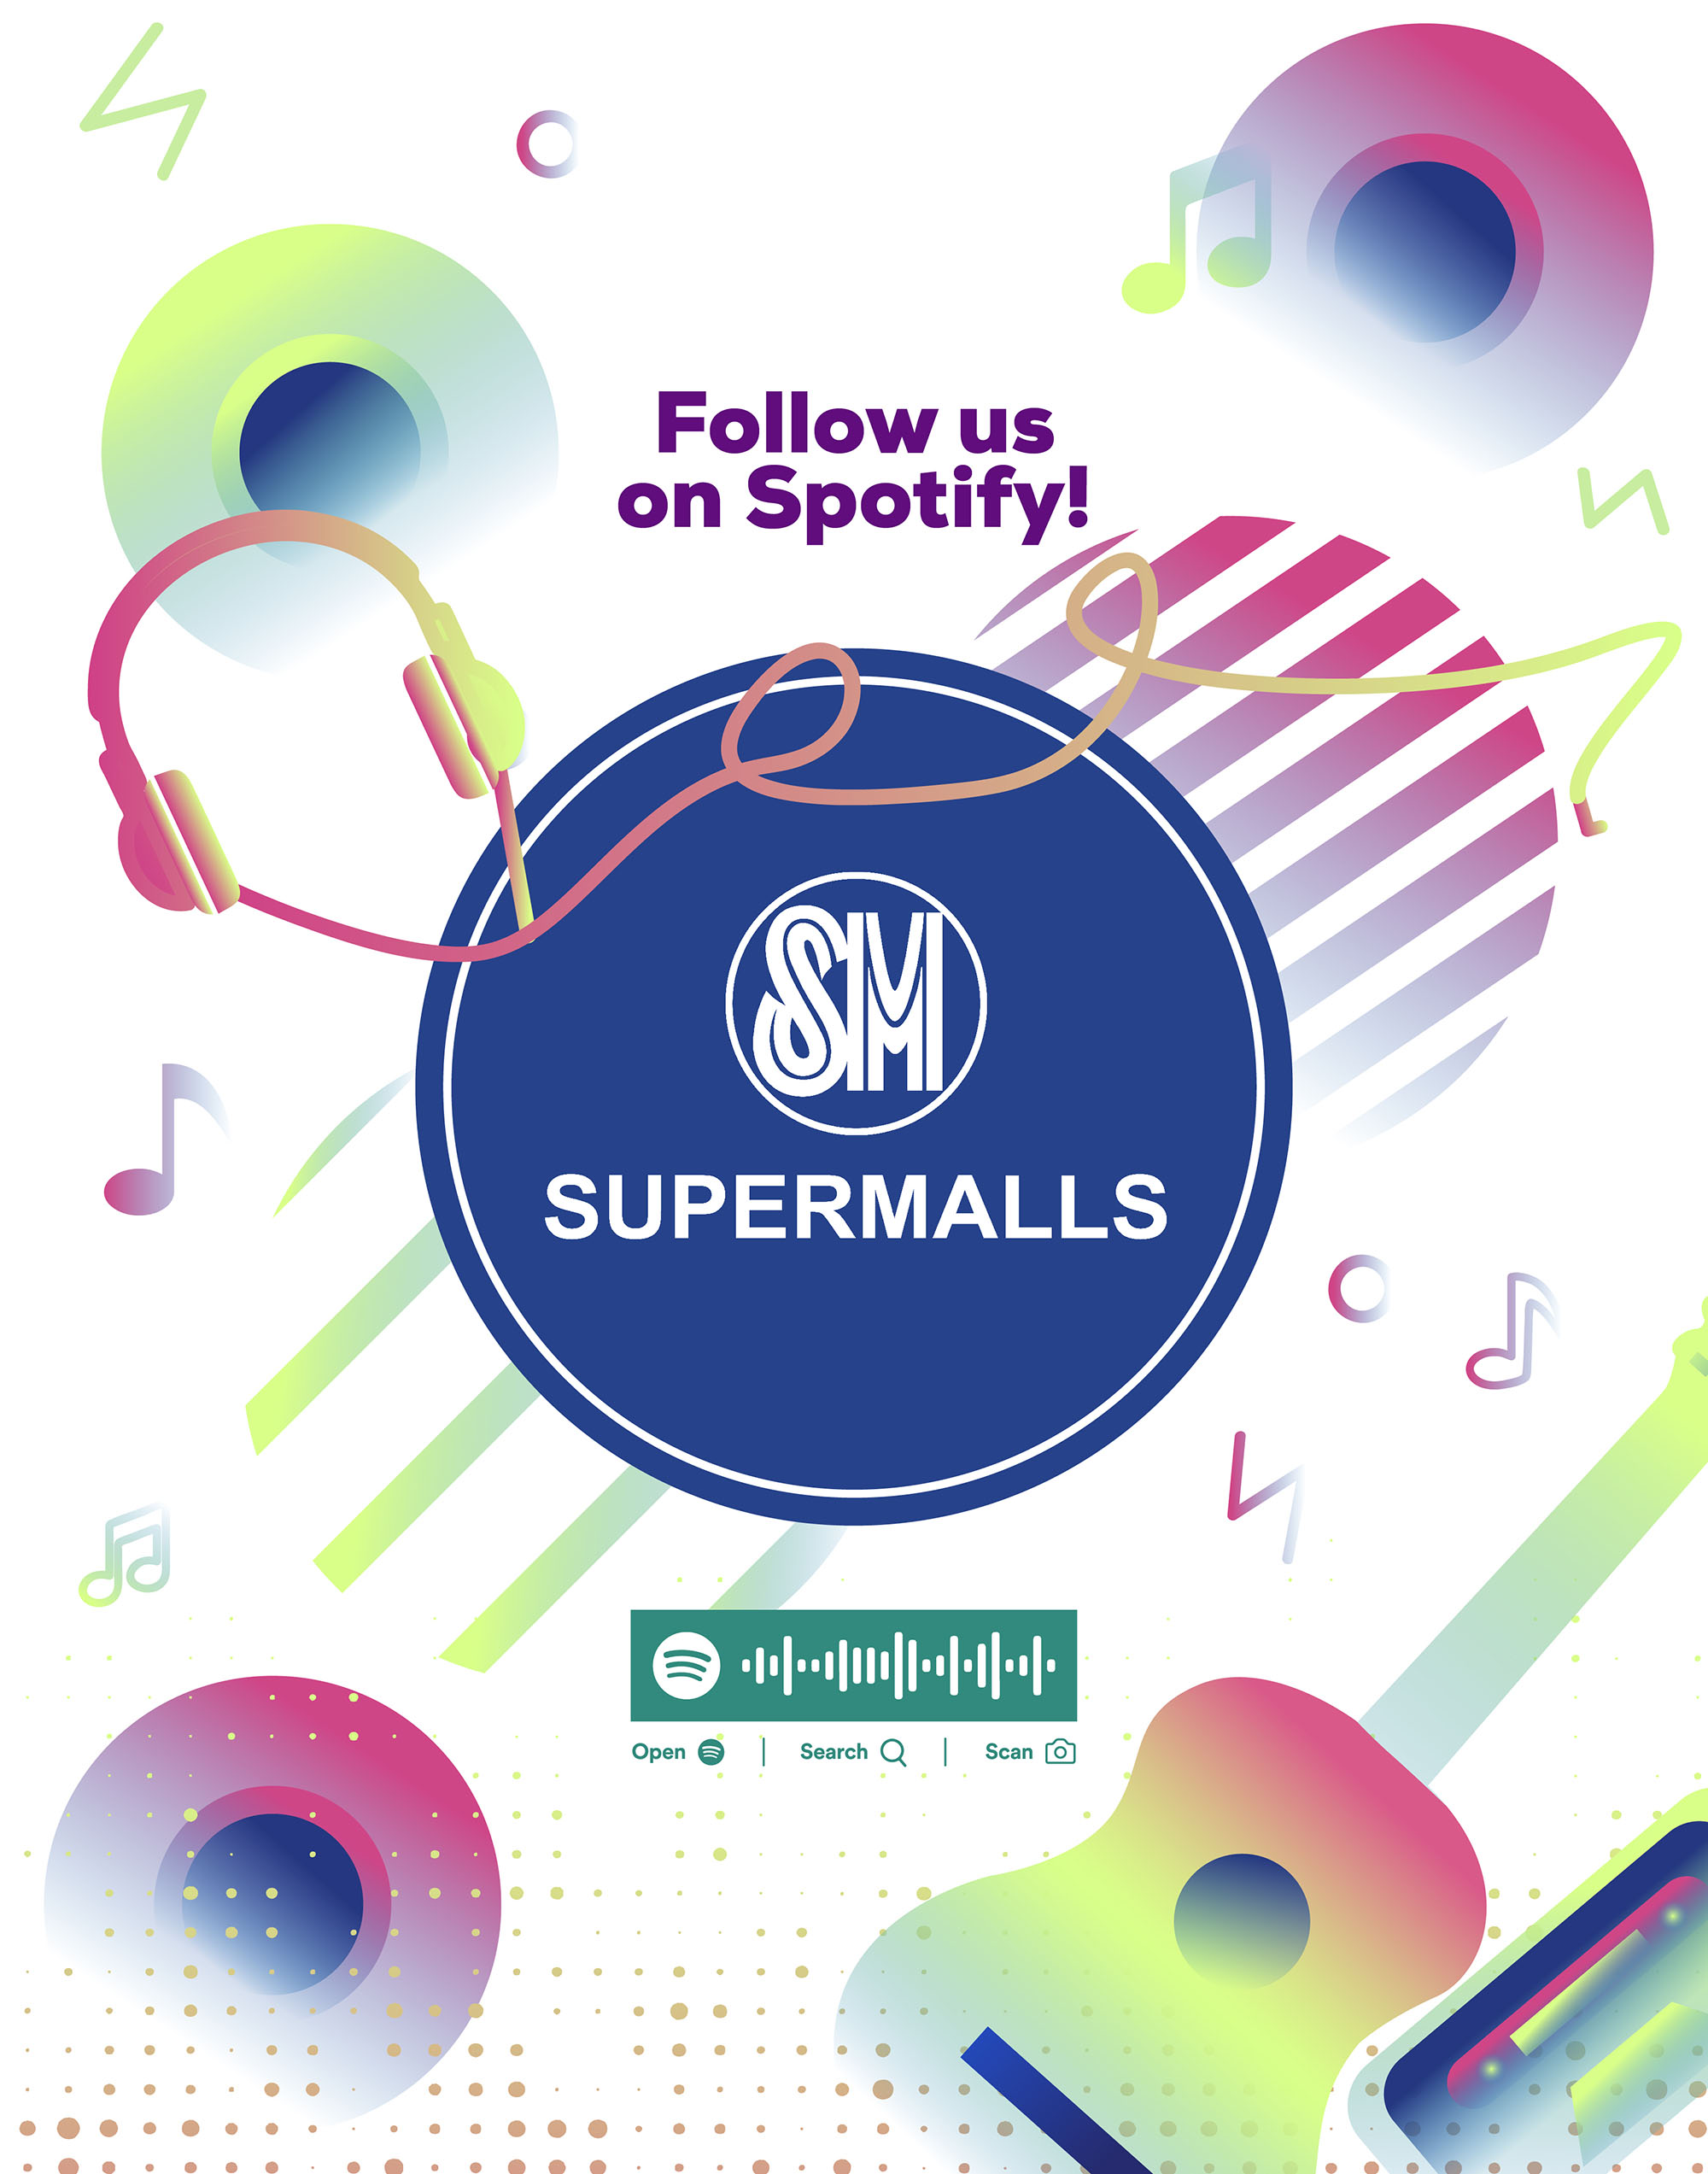 Get the party started with SM’s new Spotify playlist